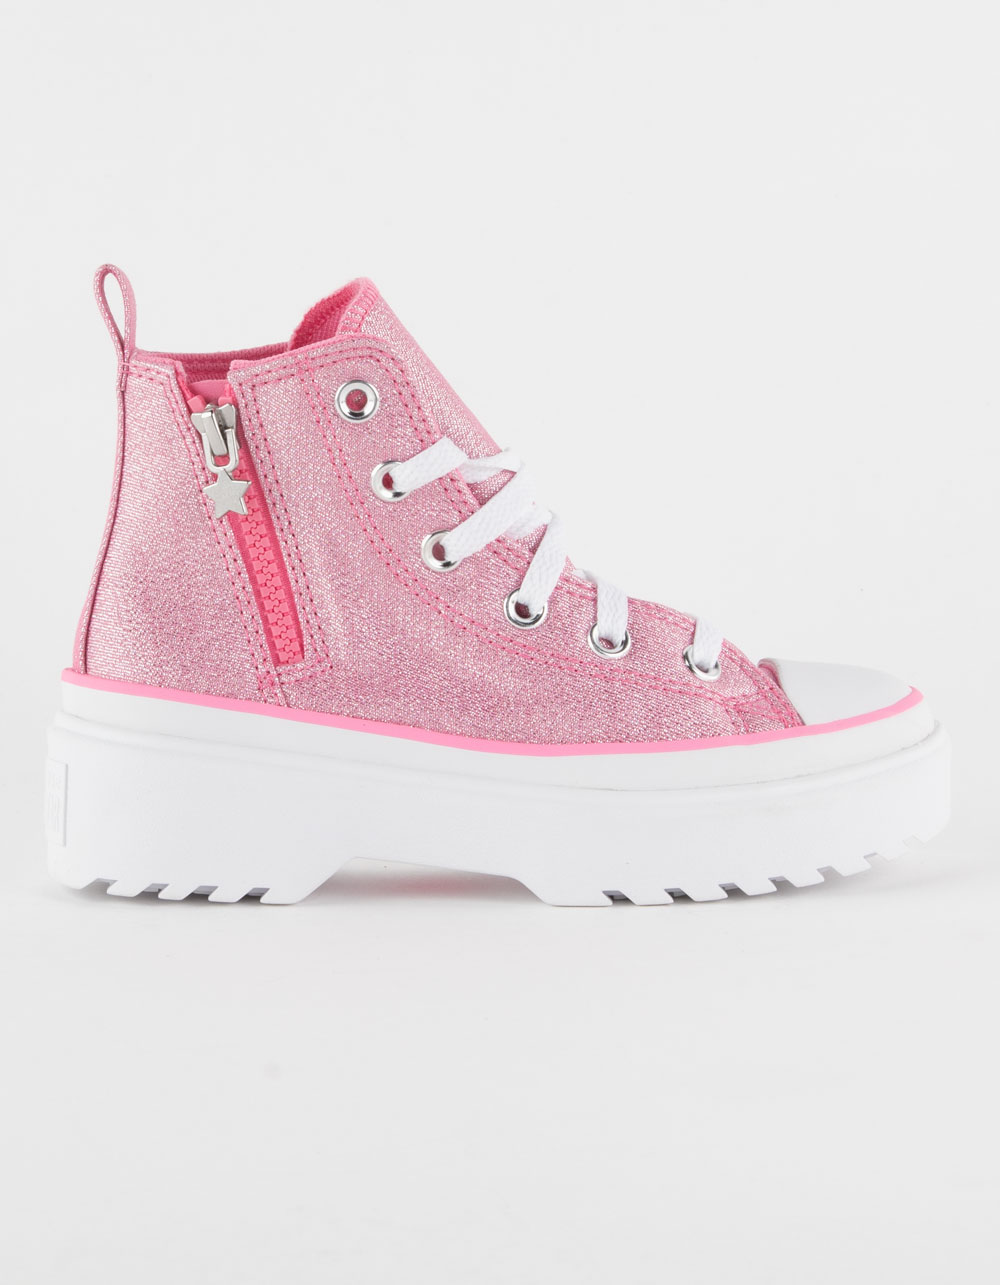 Louis Vuitton And Kitty Glitter Chuck Taylor All Star Sneakers - Blinkenzo